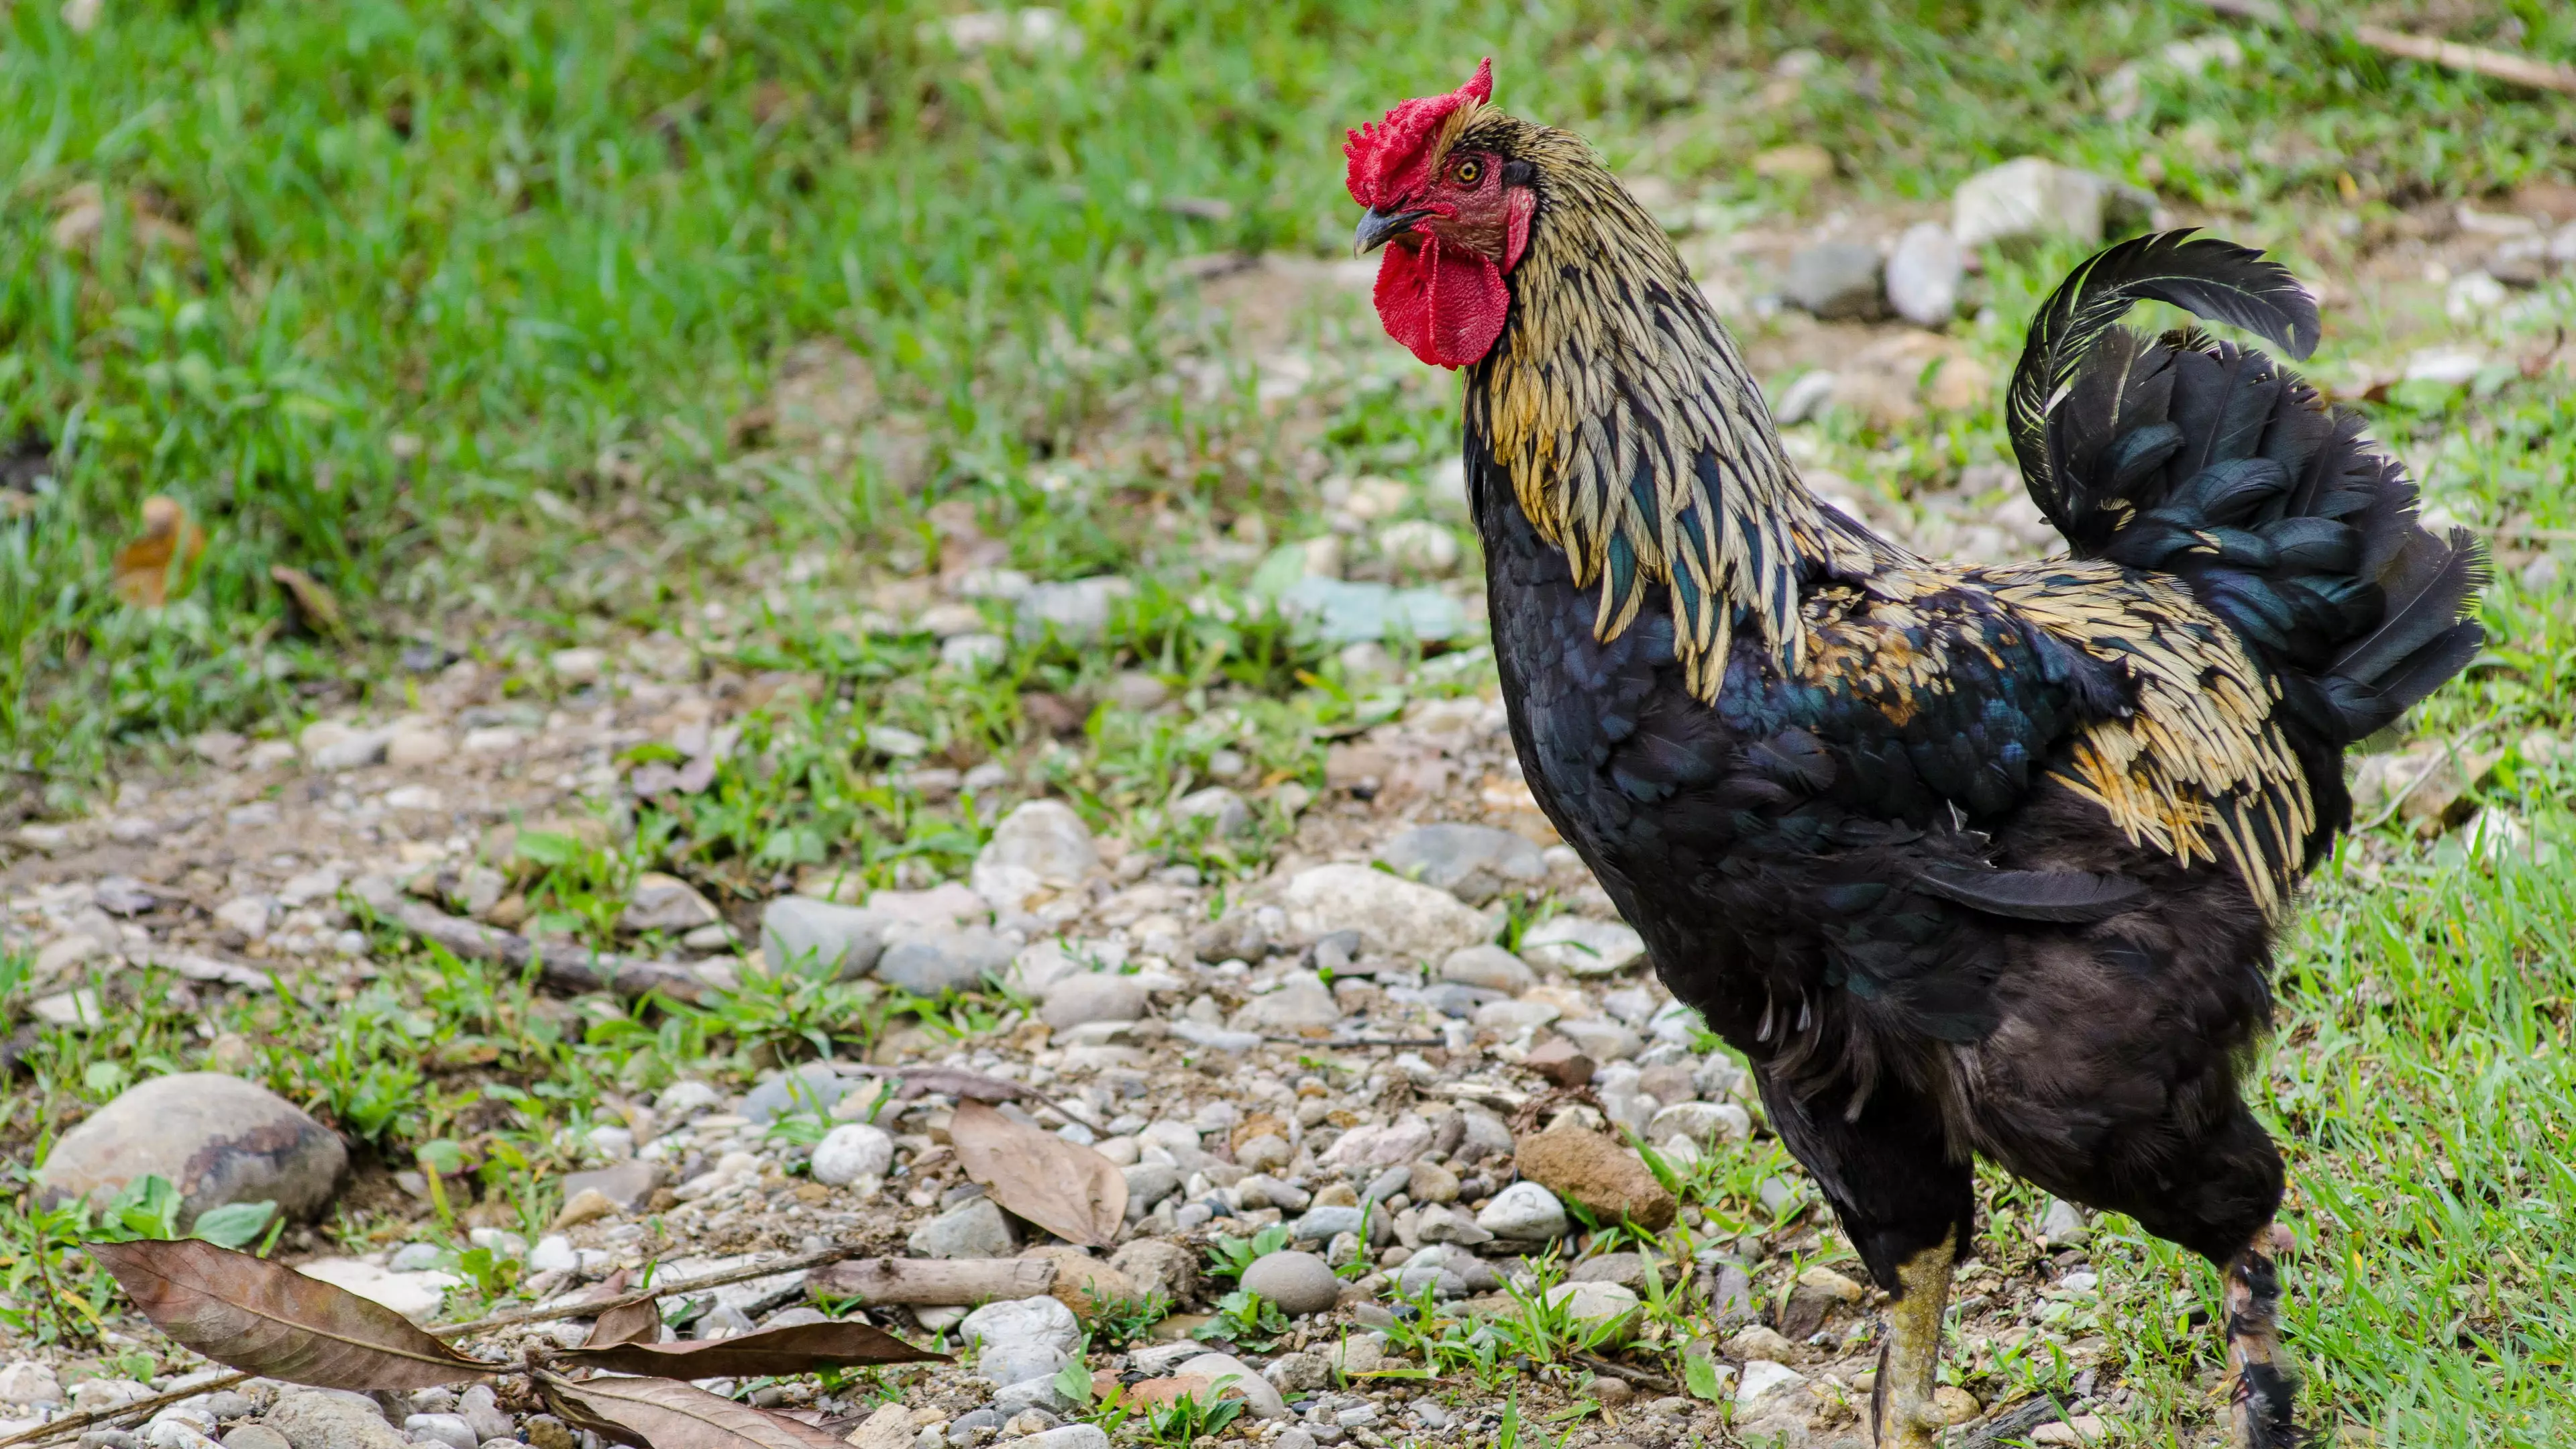 An Australian Woman Has Been Killed By Her Pet Rooster